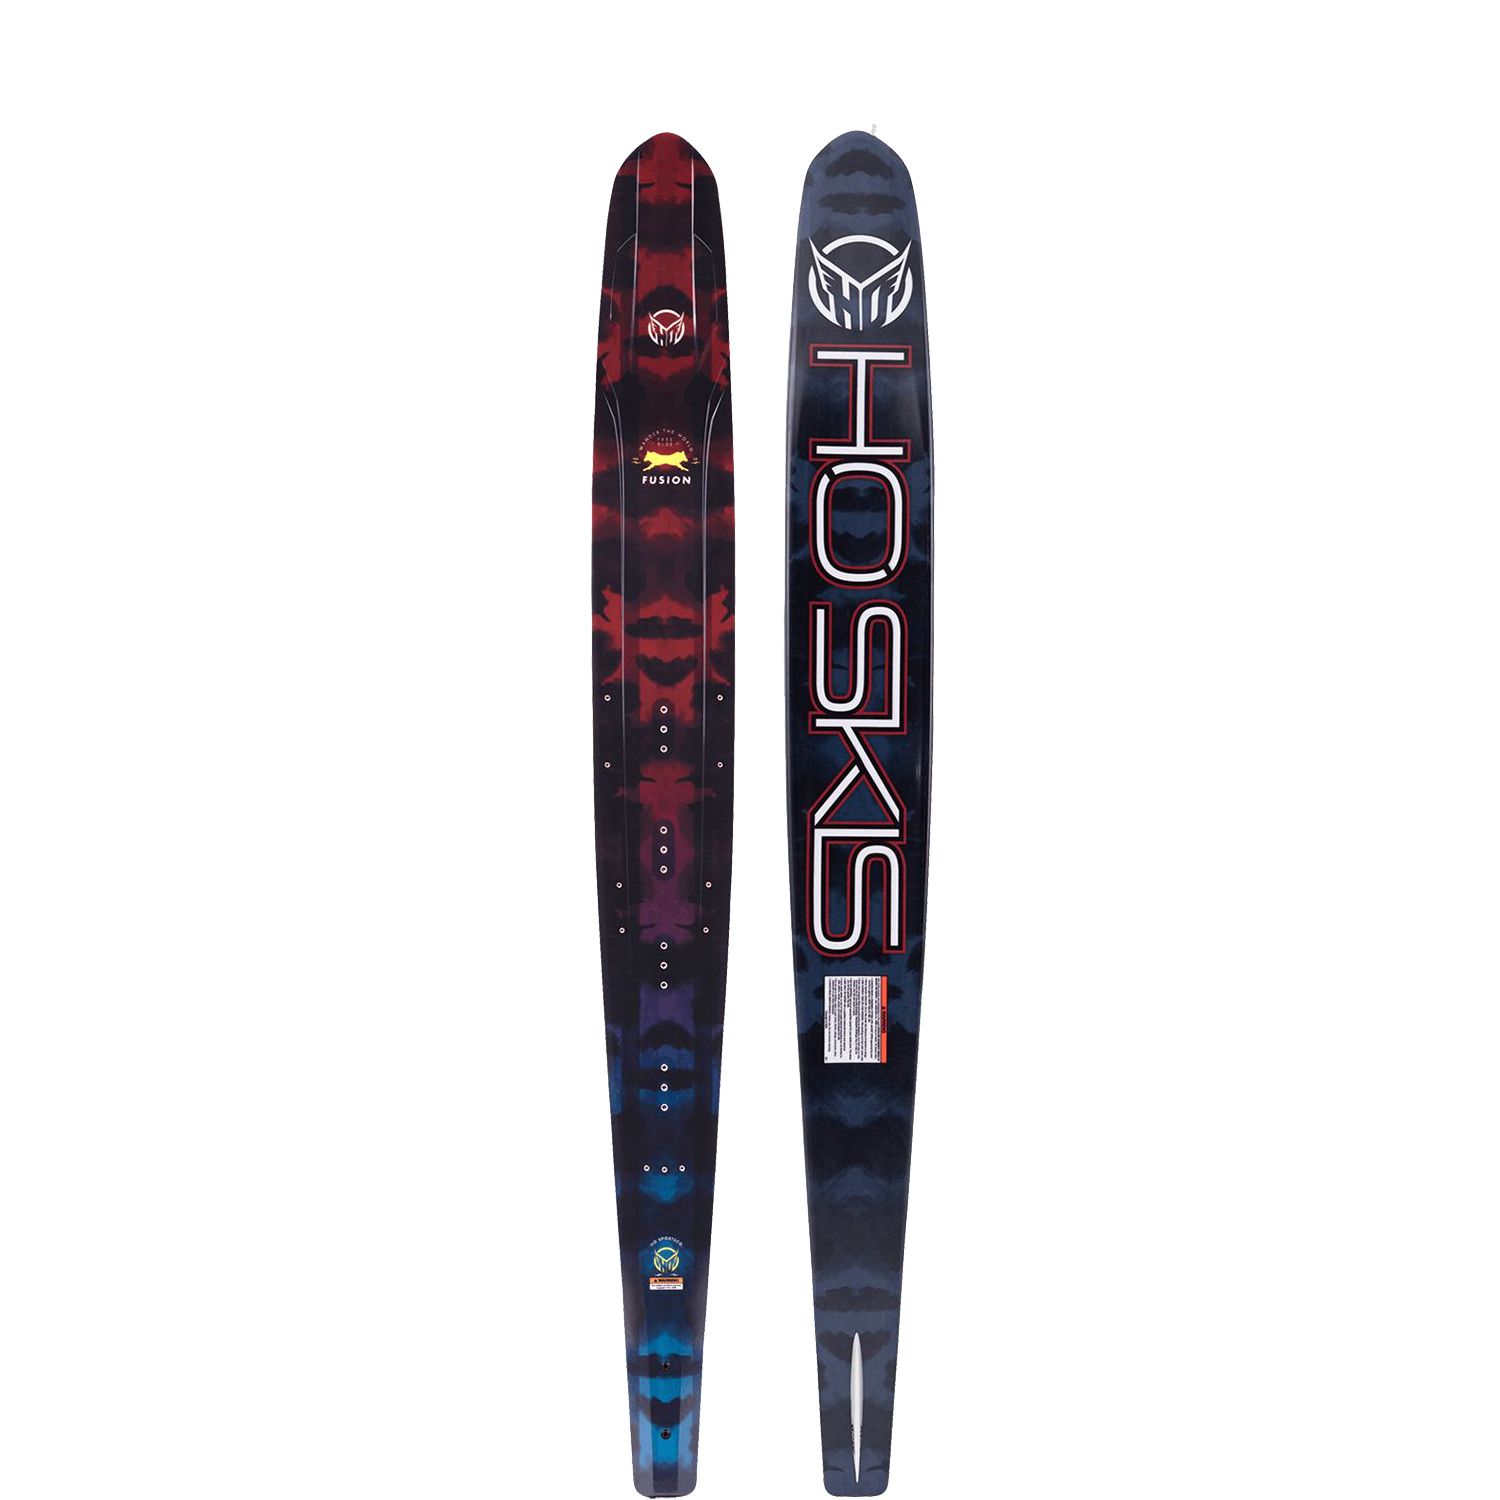 HO Sports 65 Fusion Freeride Water Skis